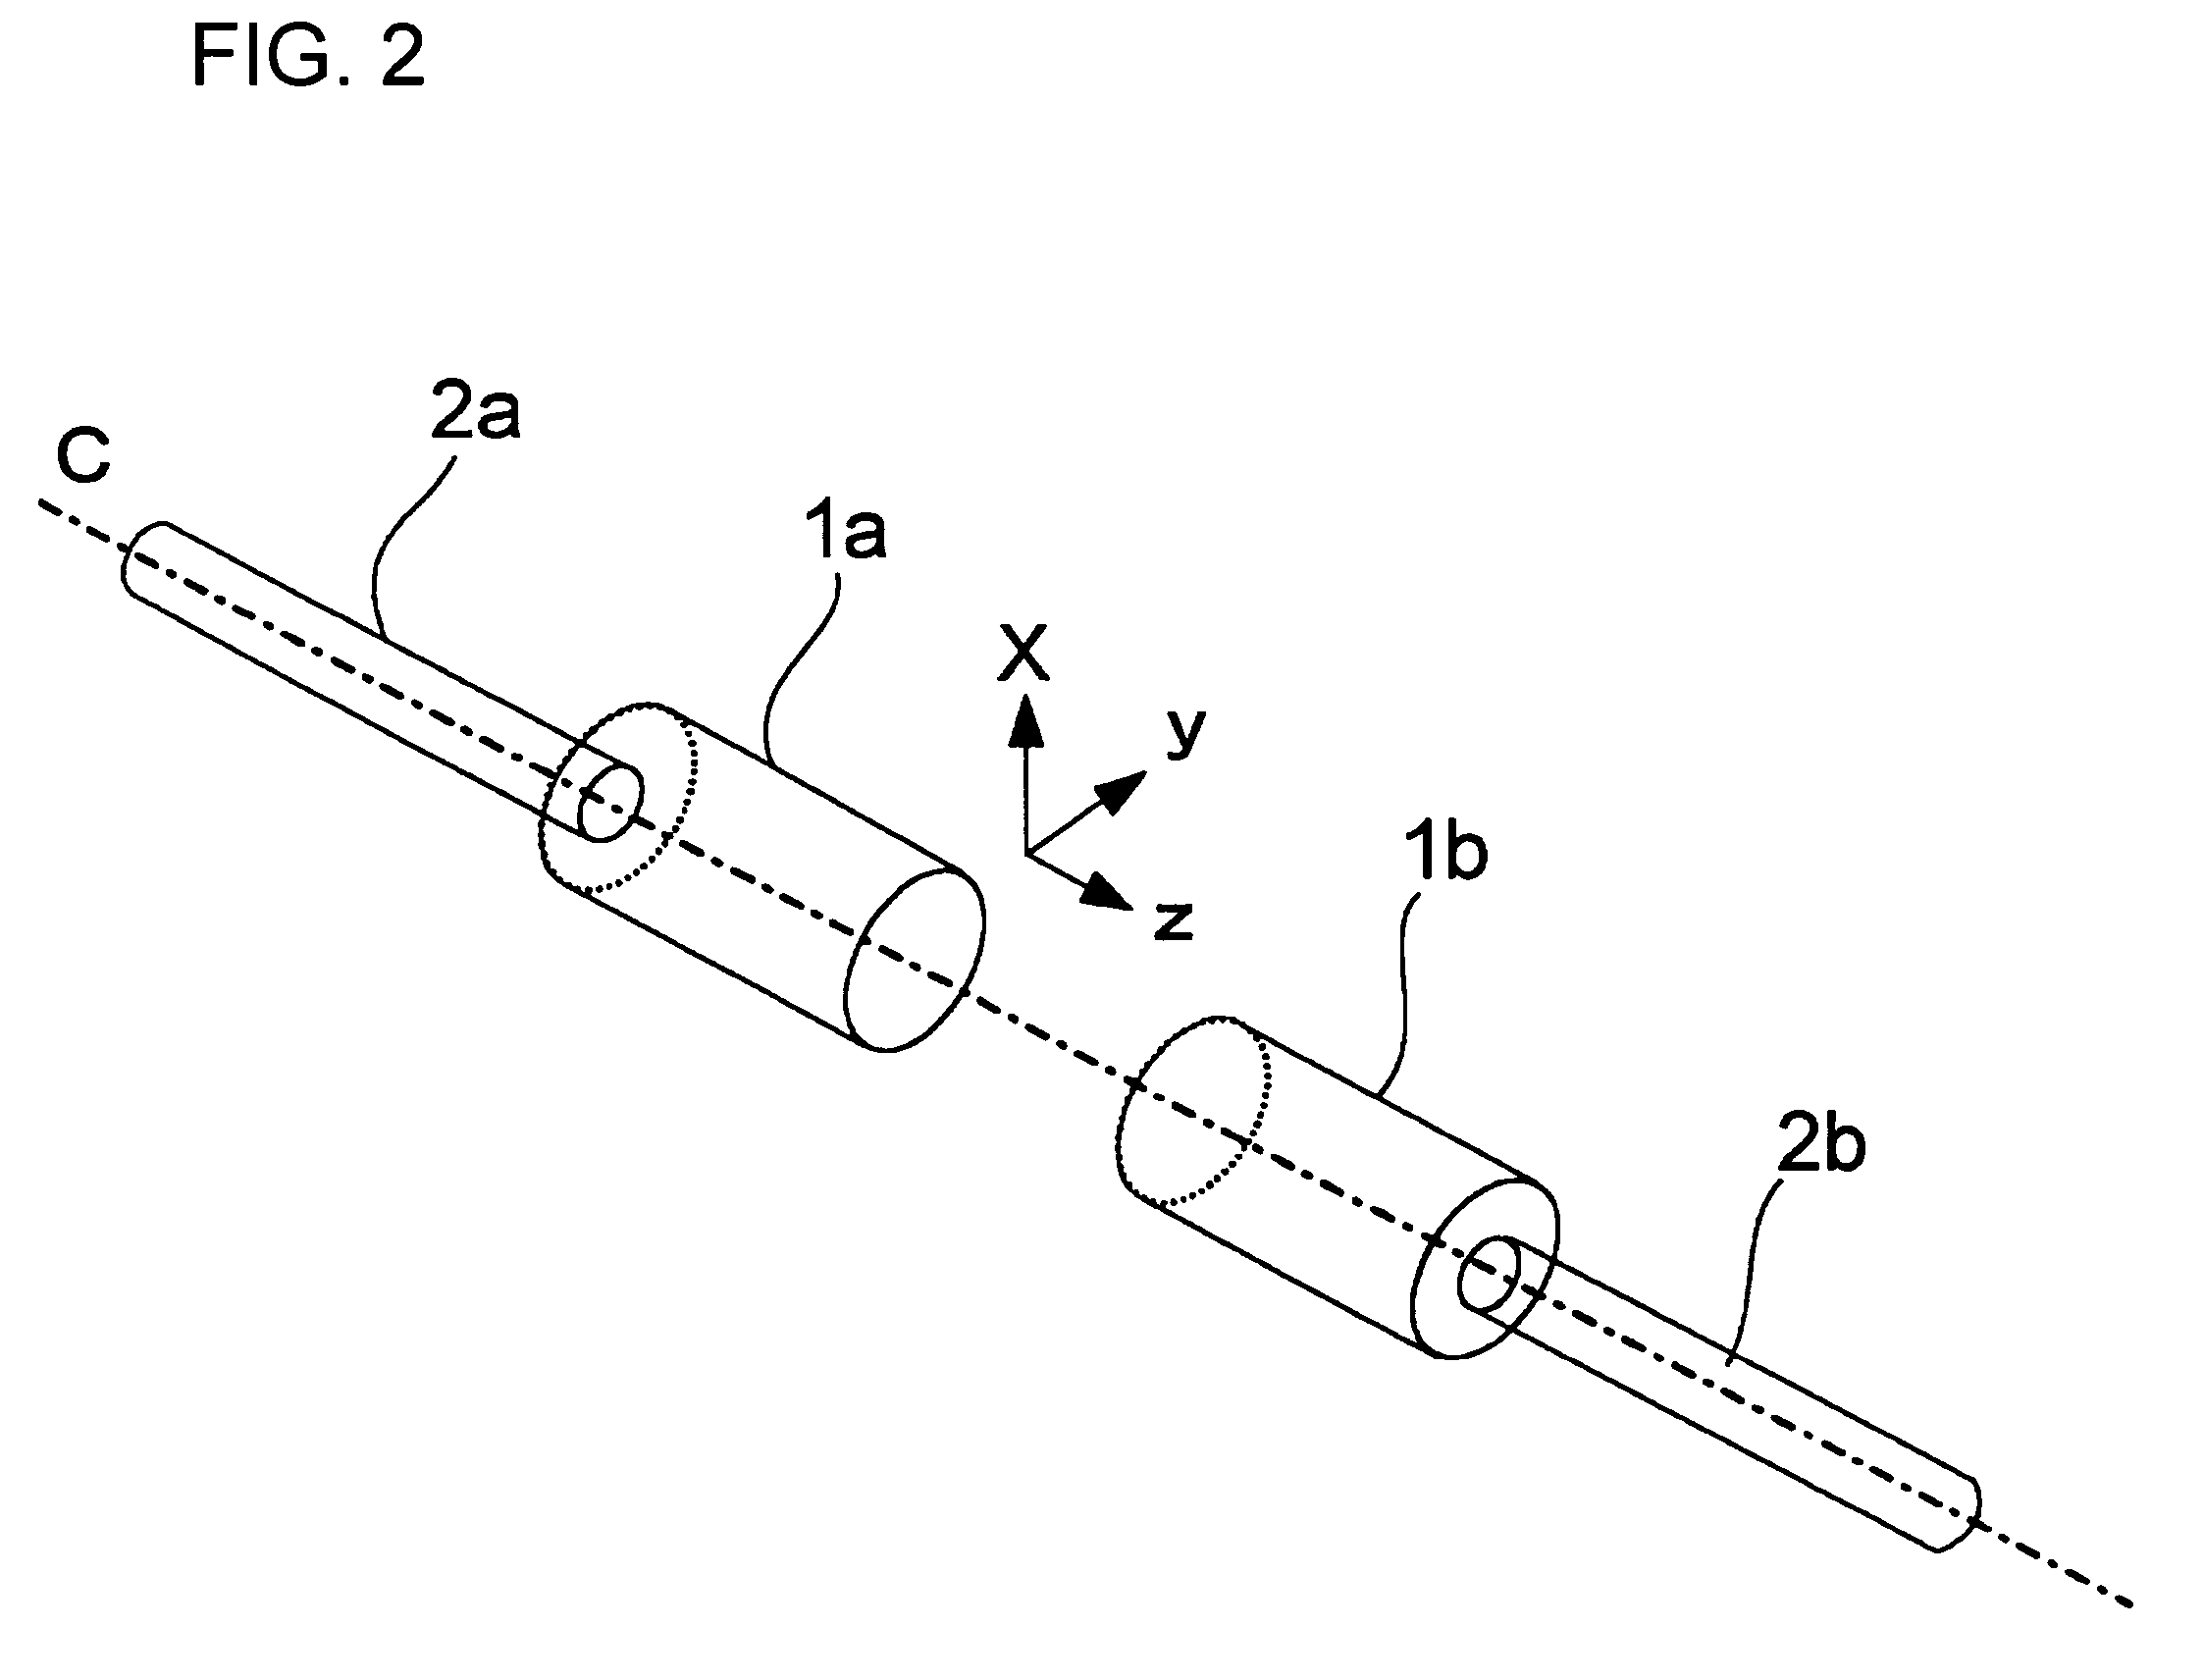 Fiber optic collimator system, fiber optic collimator array, and manufacturing method of the fiber optic collimator system and fiber optic collimator array system